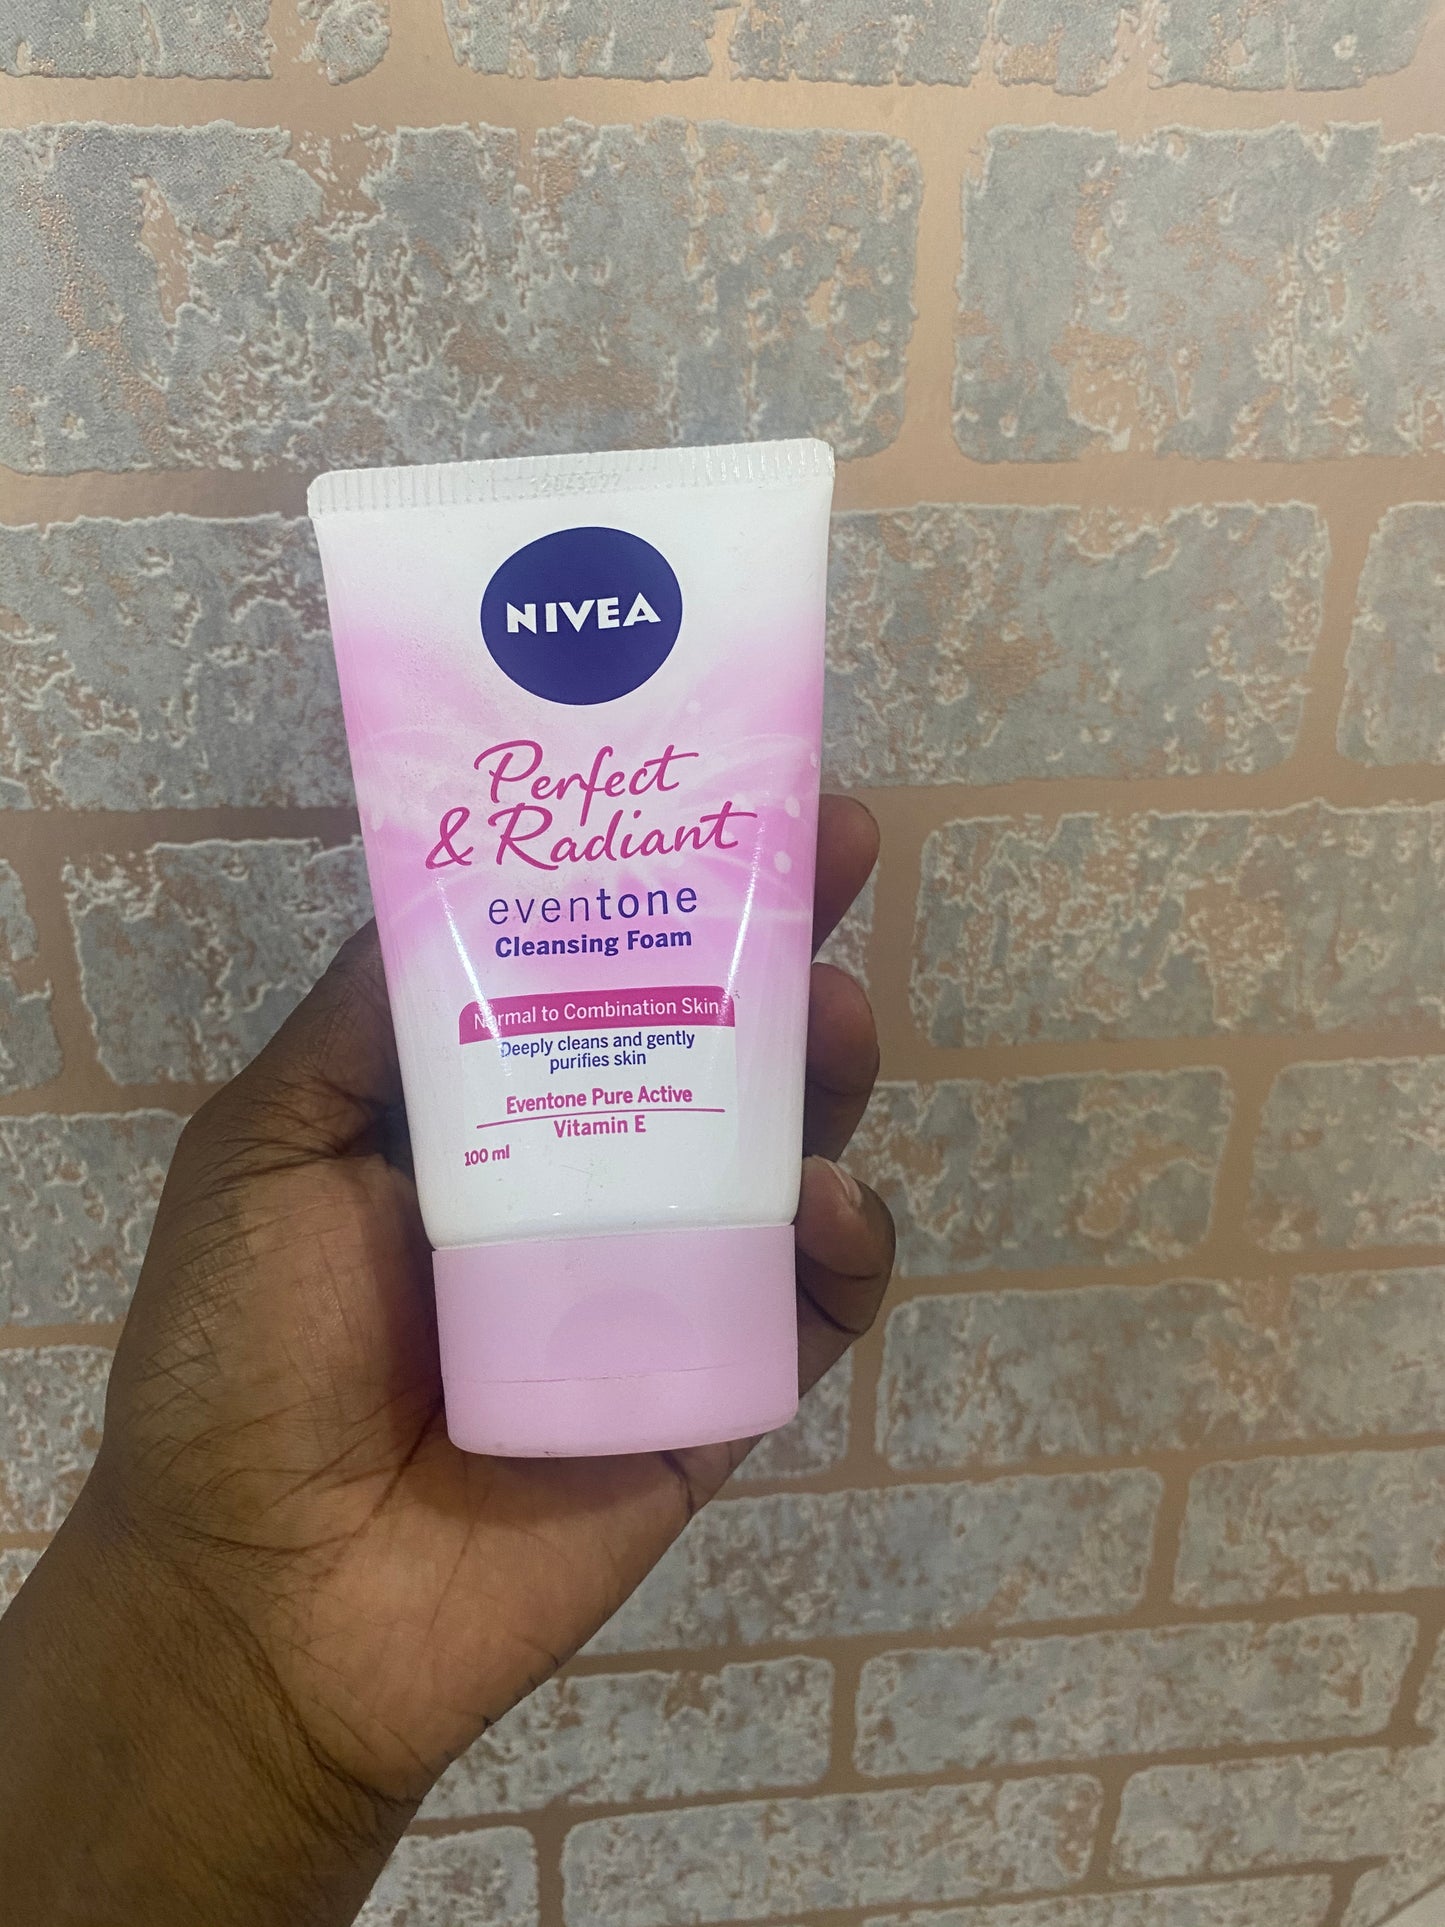 Nivea Radiant and Perfect Cleansing Foam